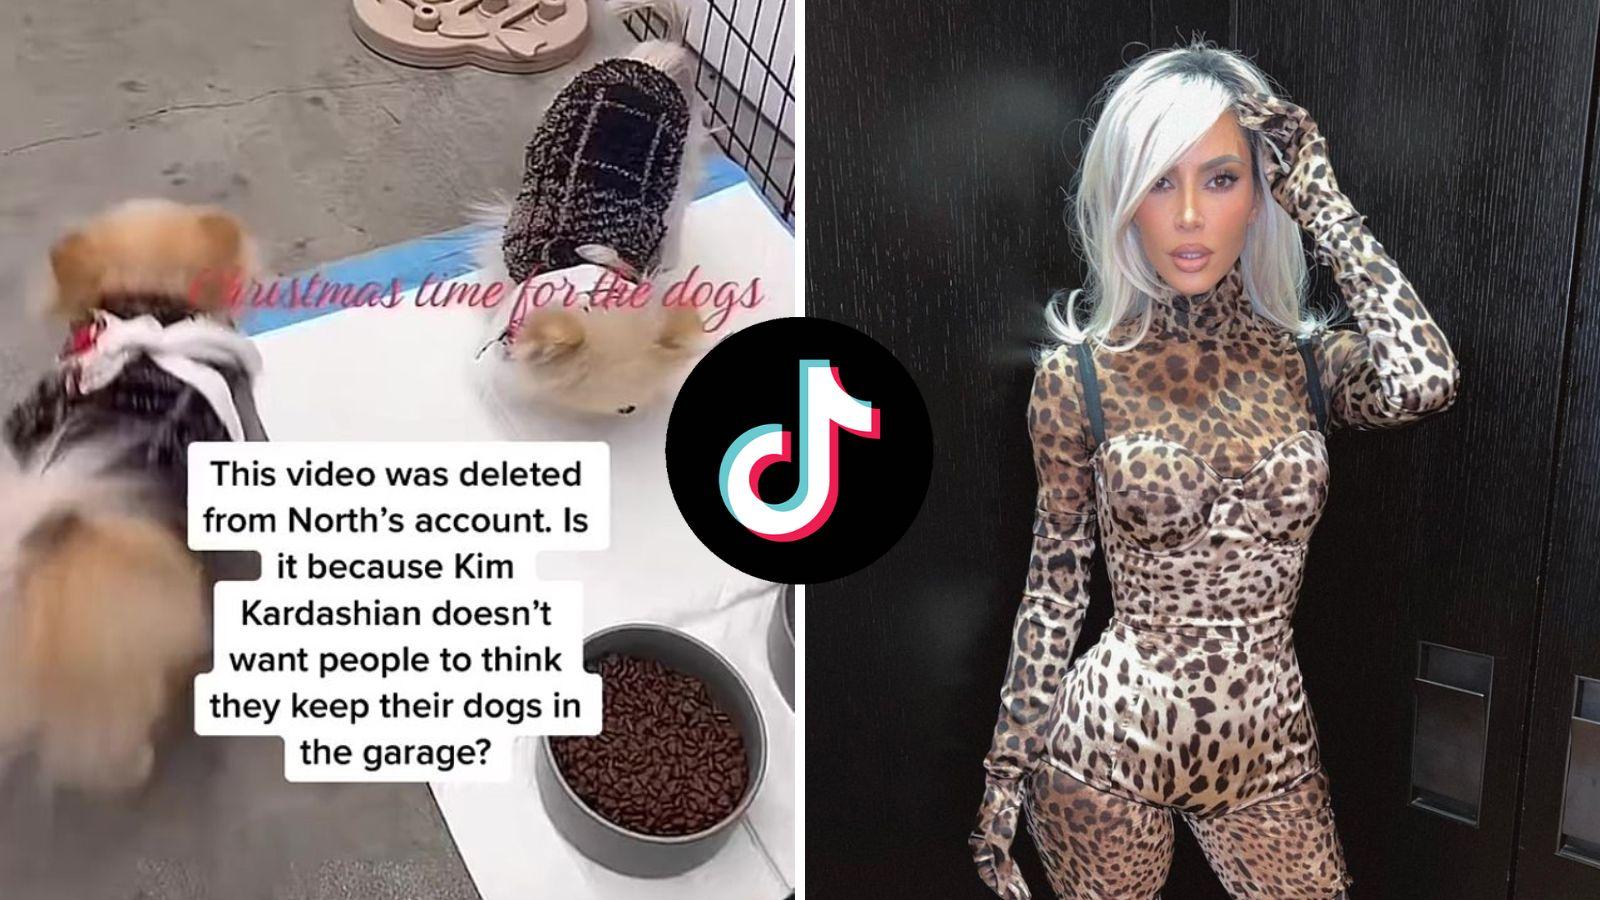 Kim Kardashian warned by PETA after video shows her dogs seemingly living in garage